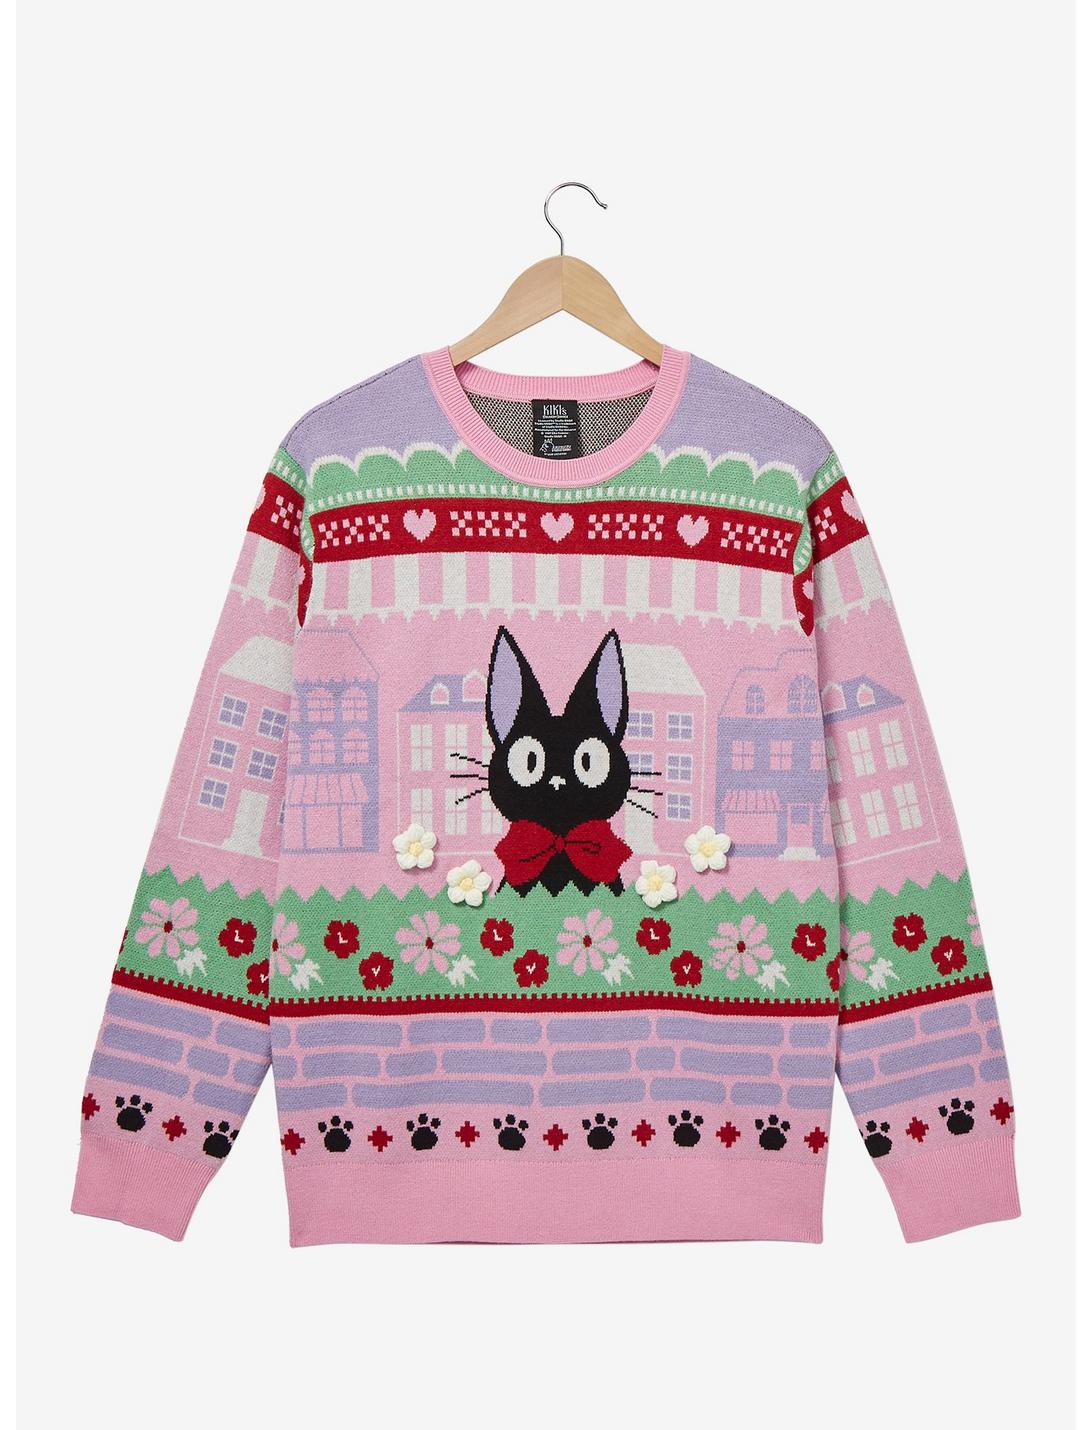 Studio Ghibli Kiki's Delivery Service Jiji Floral Portrait Holiday Sweater - BoxLunch Exclusive, PINK, hi-res